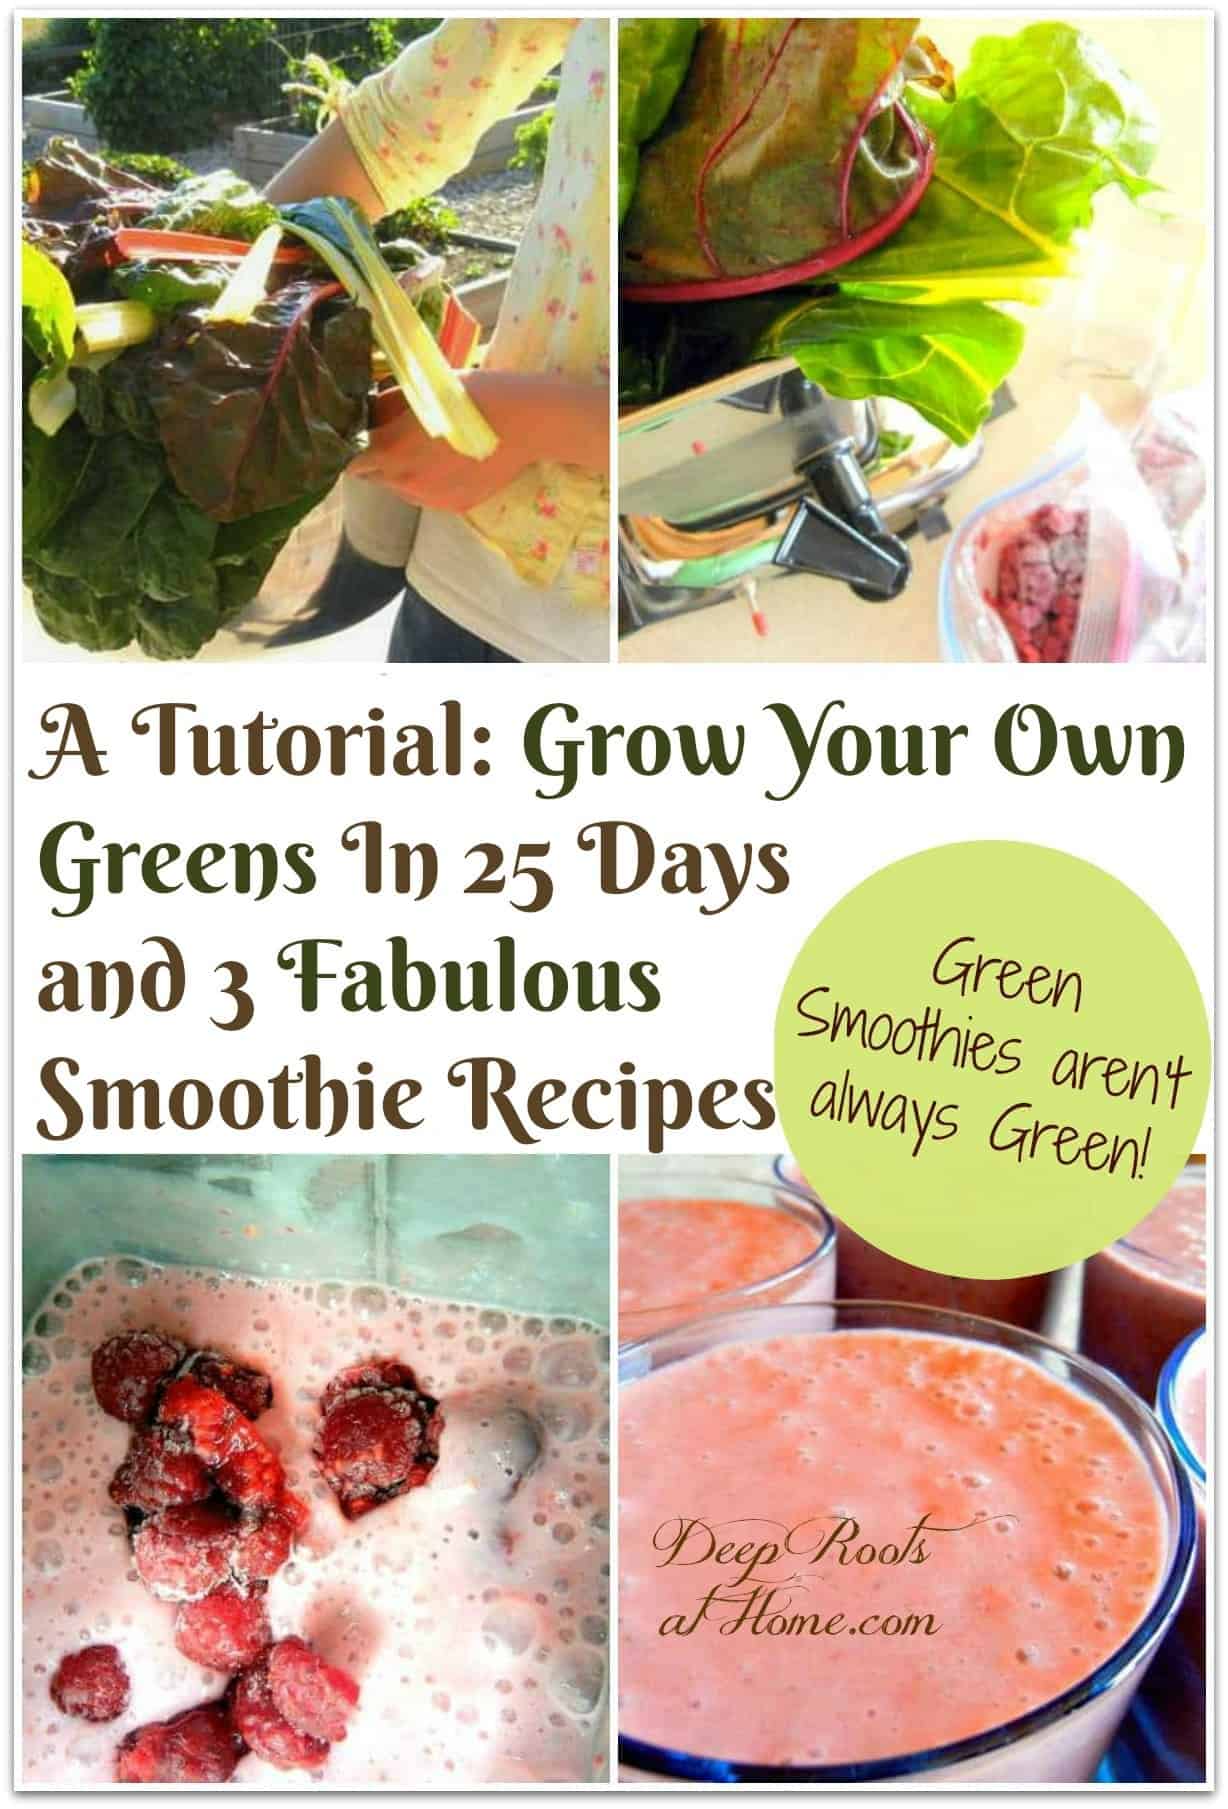 How to Grow Greens Spring or Fall in 25 Days & 3 Fab Smoothie Recipes. A collage of making green smoothies with fresh greens from the garden.